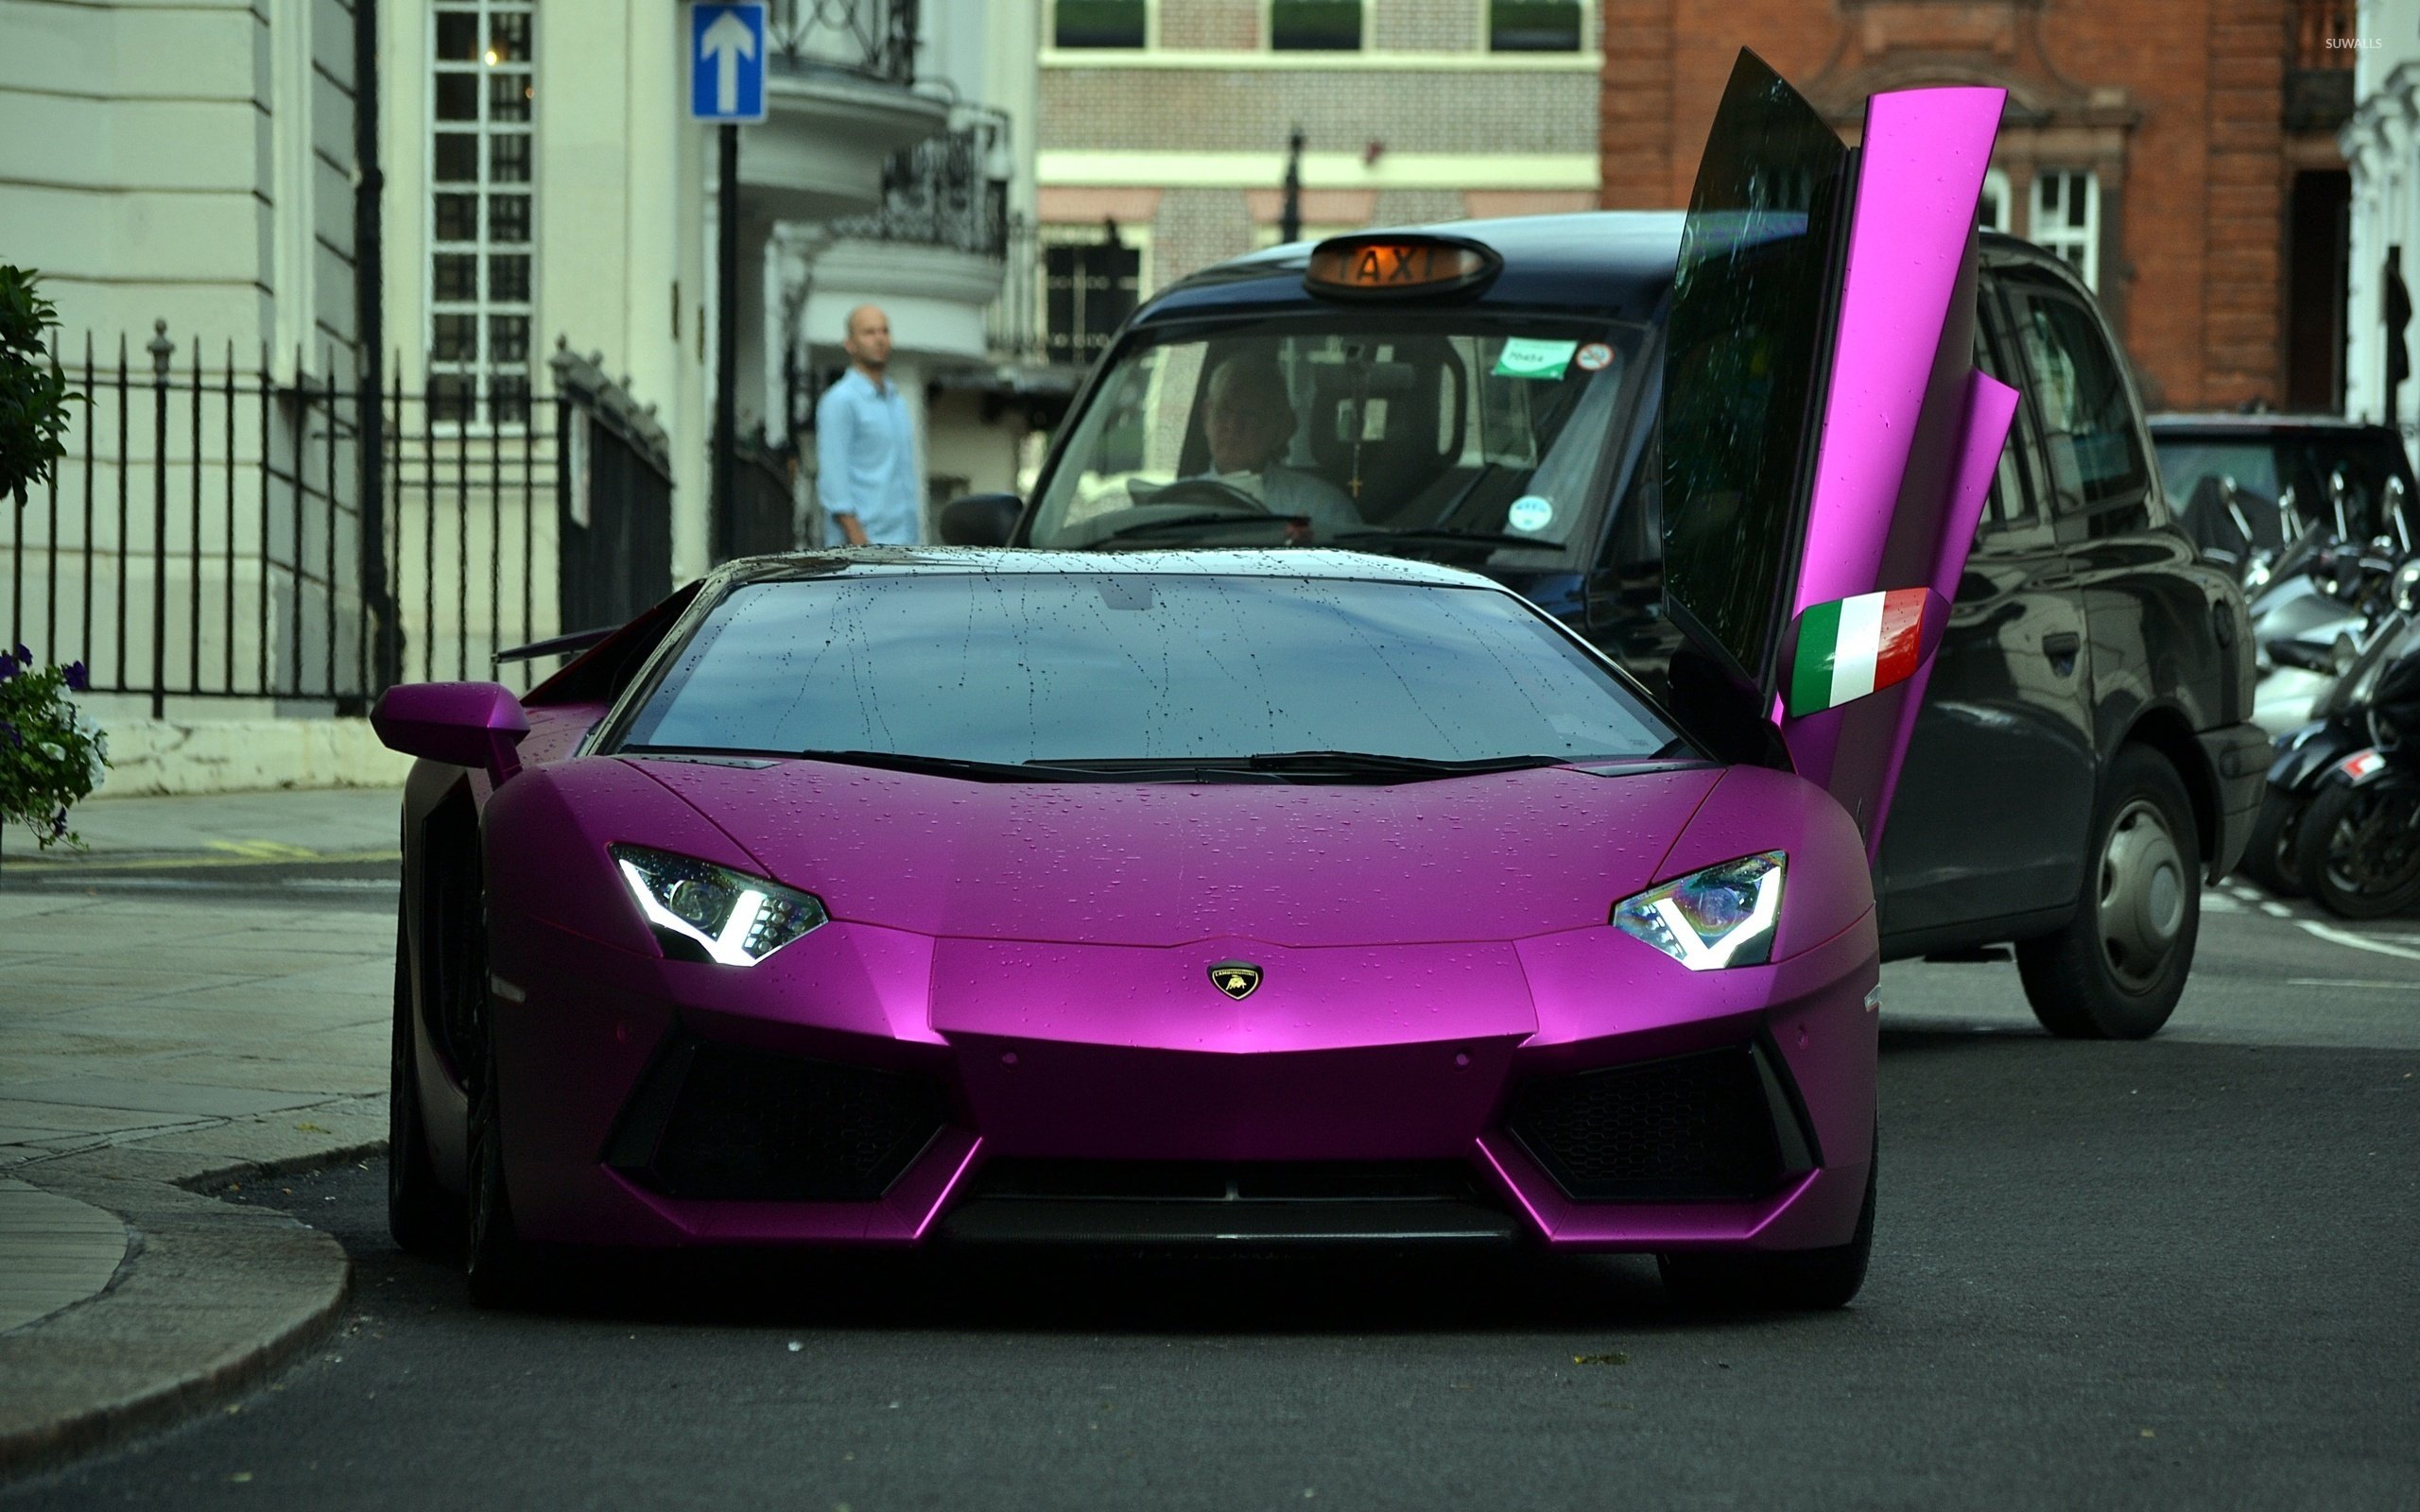 Purple Cars Wallpapers - Wallpaper Cave